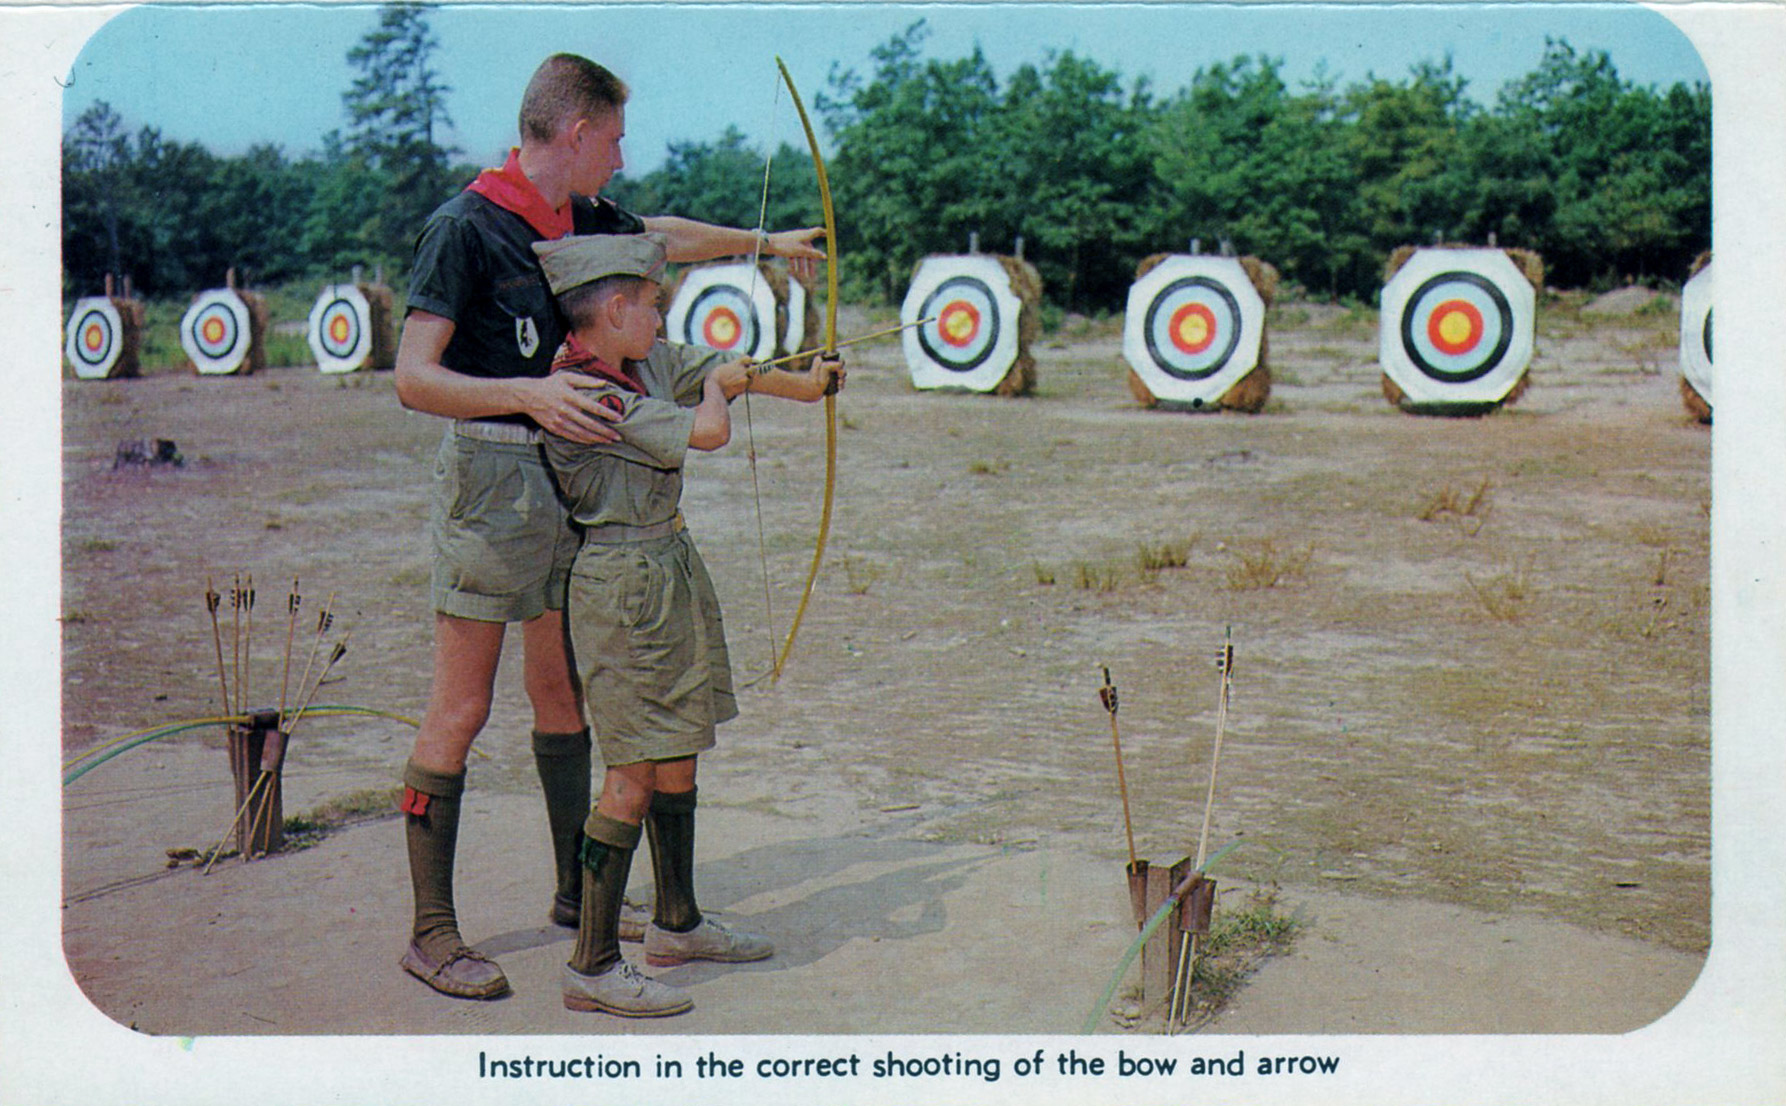 Instruction in the correct shooting of the bow and arrow